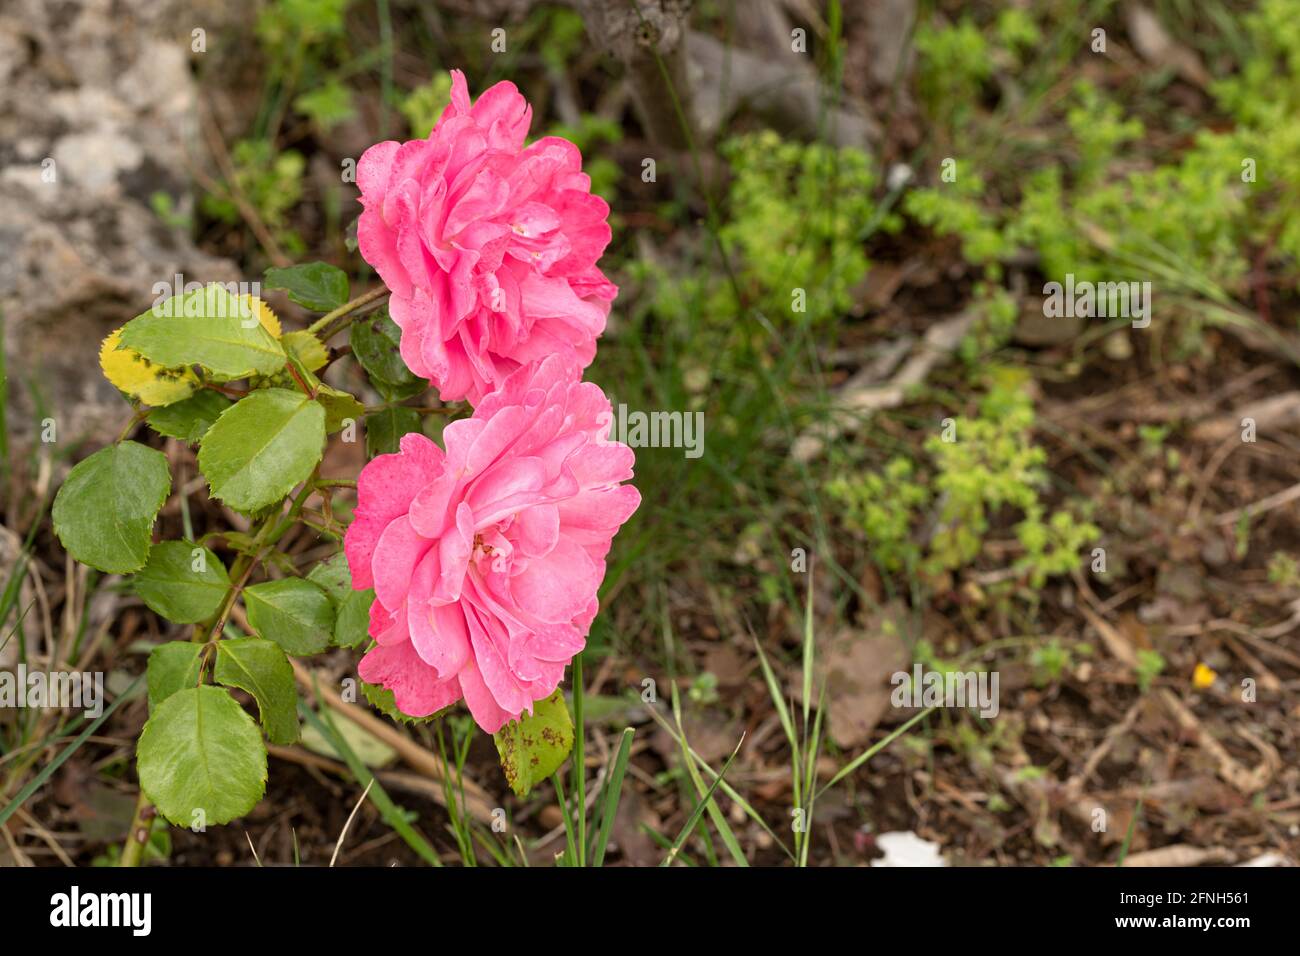 Pink roses in bloom in a garden Stock Photo